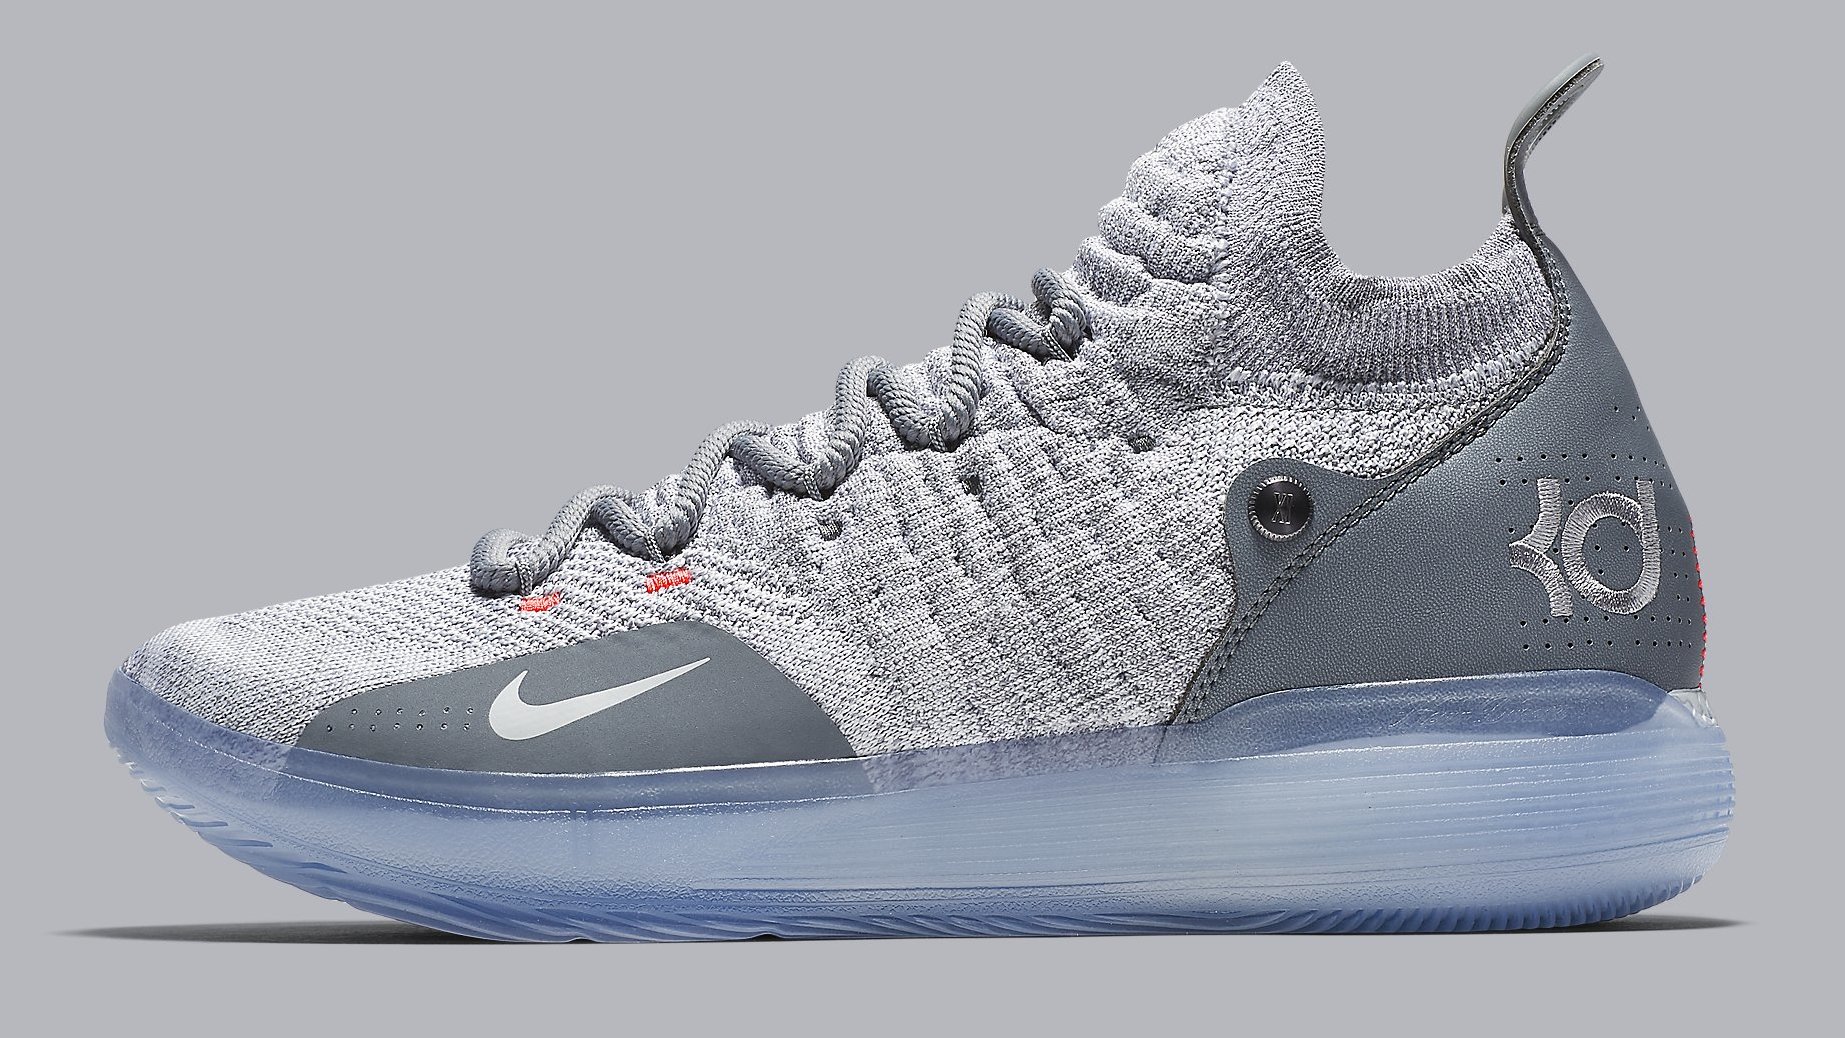 Nike KD 11 Cool Grey Release Date AO2605 002 Lateral